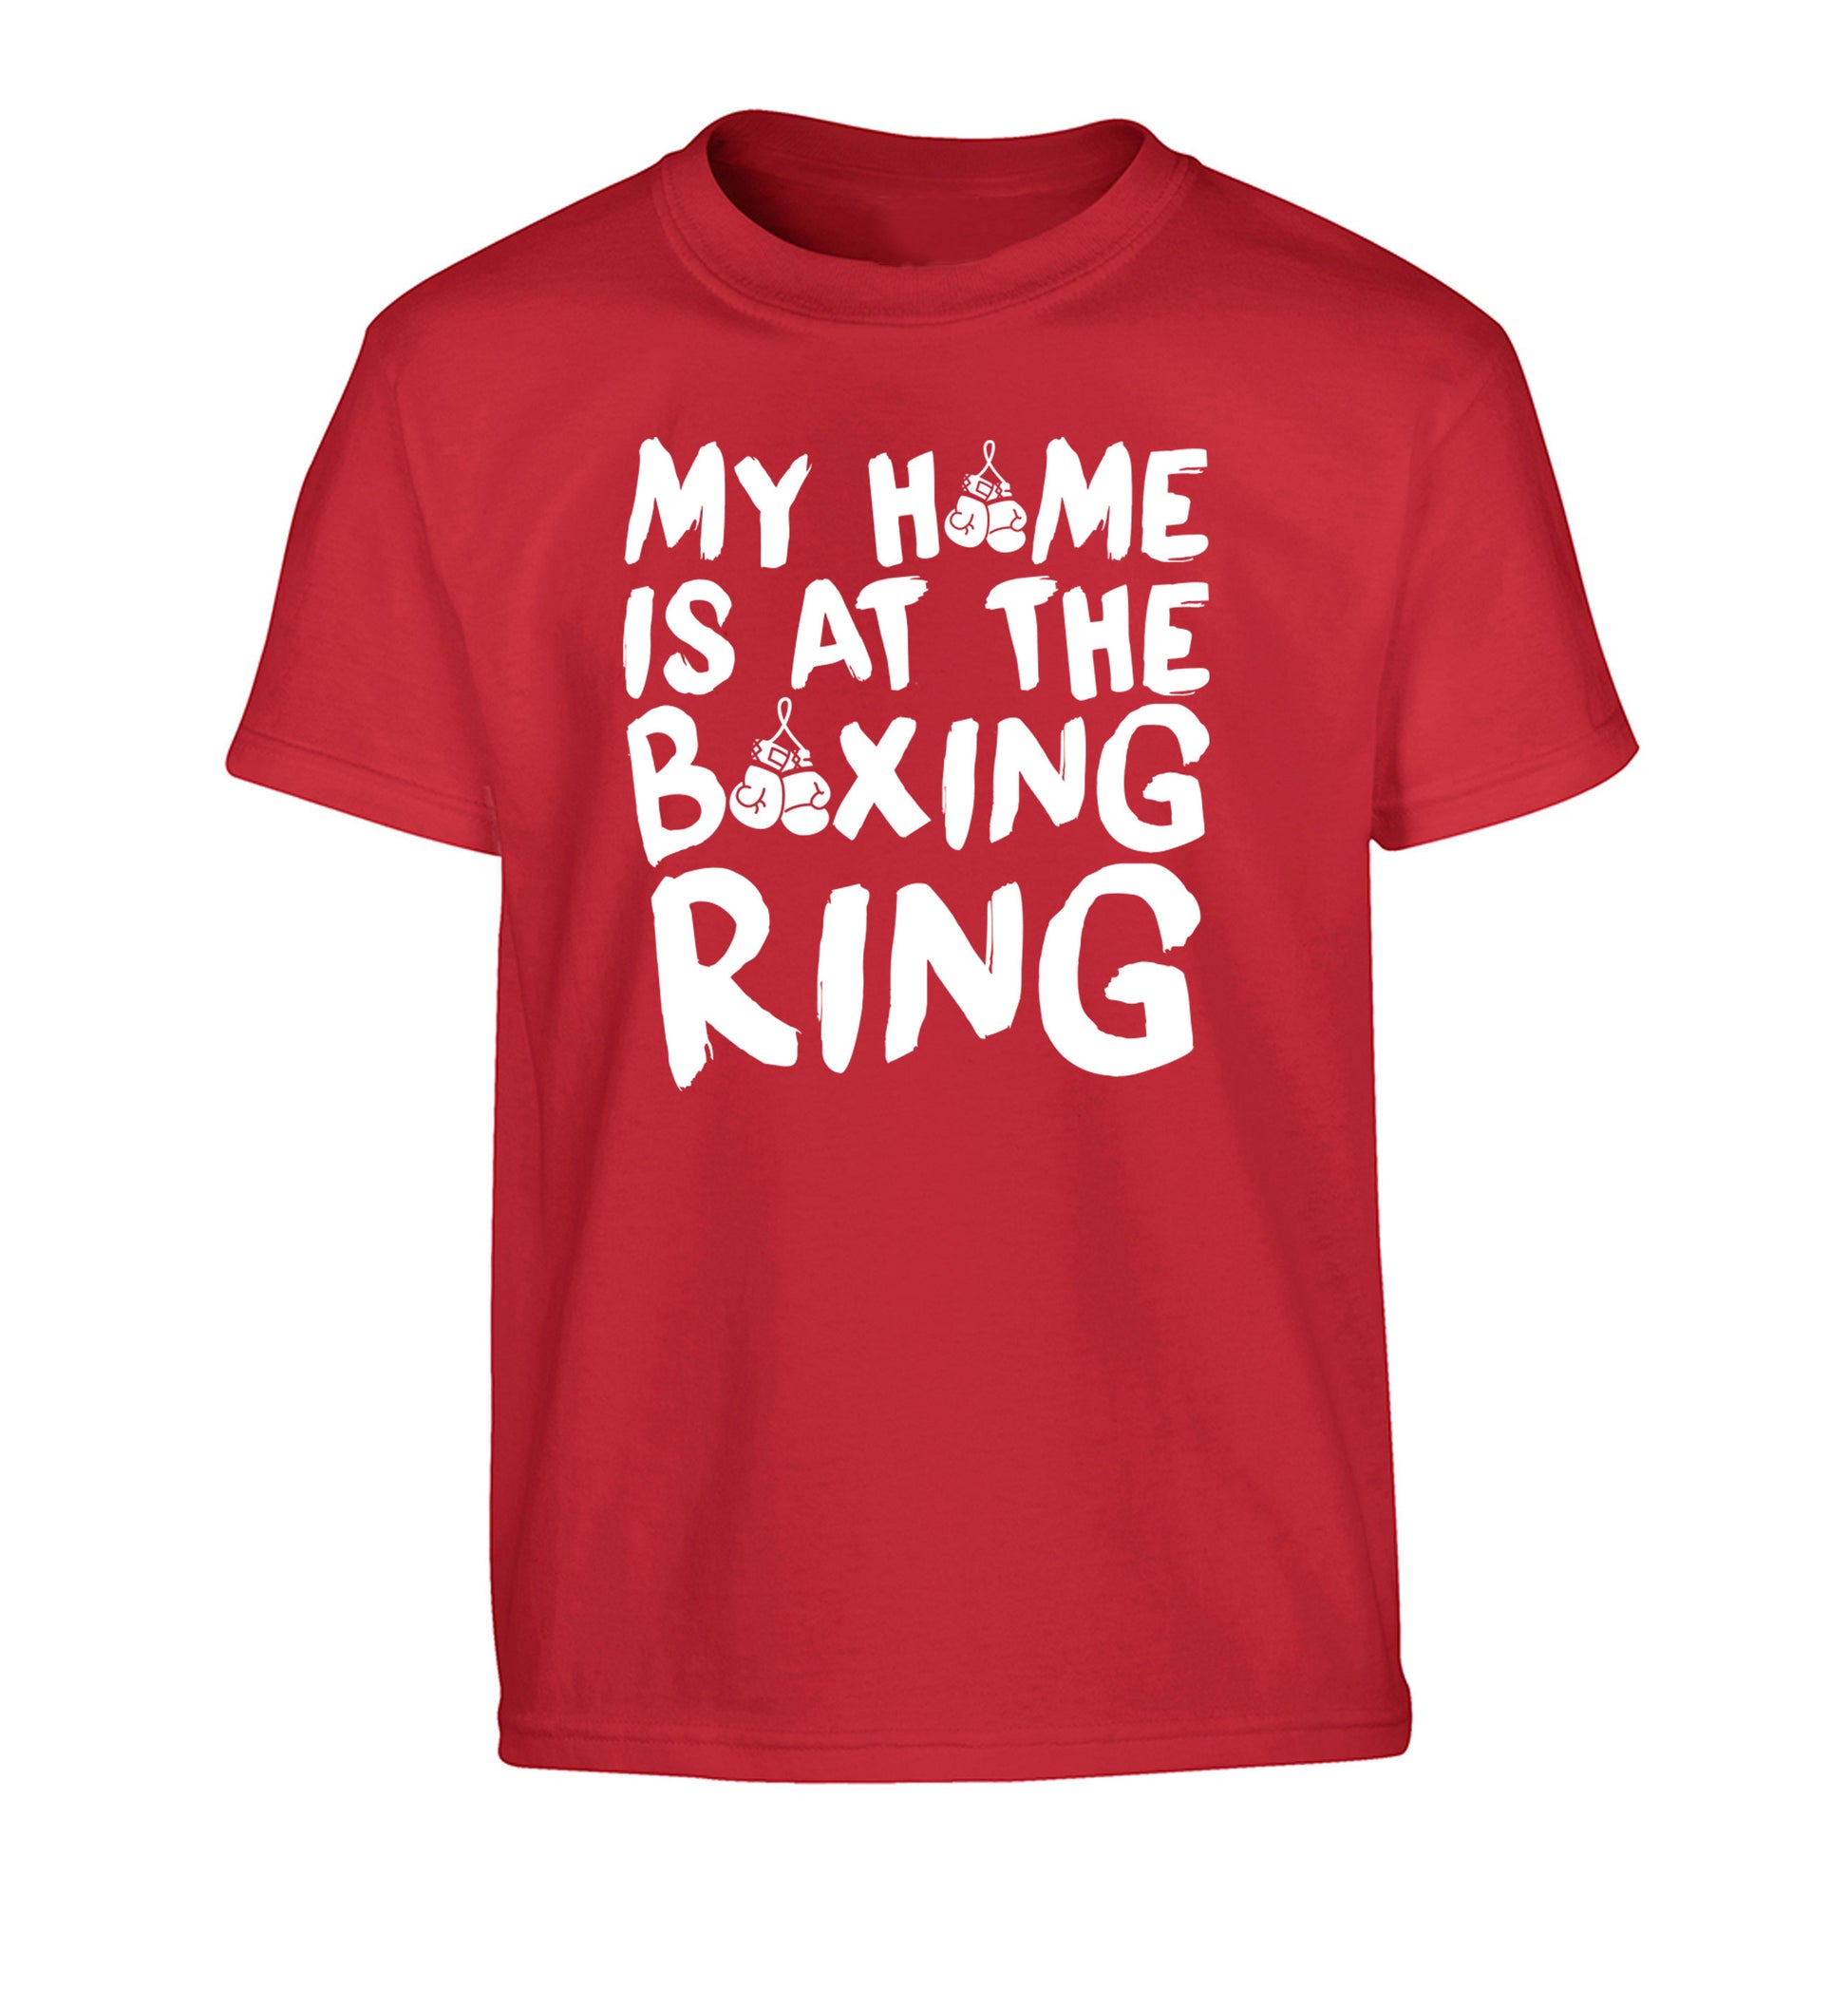 My home is at the boxing ring Children's red Tshirt 12-14 Years